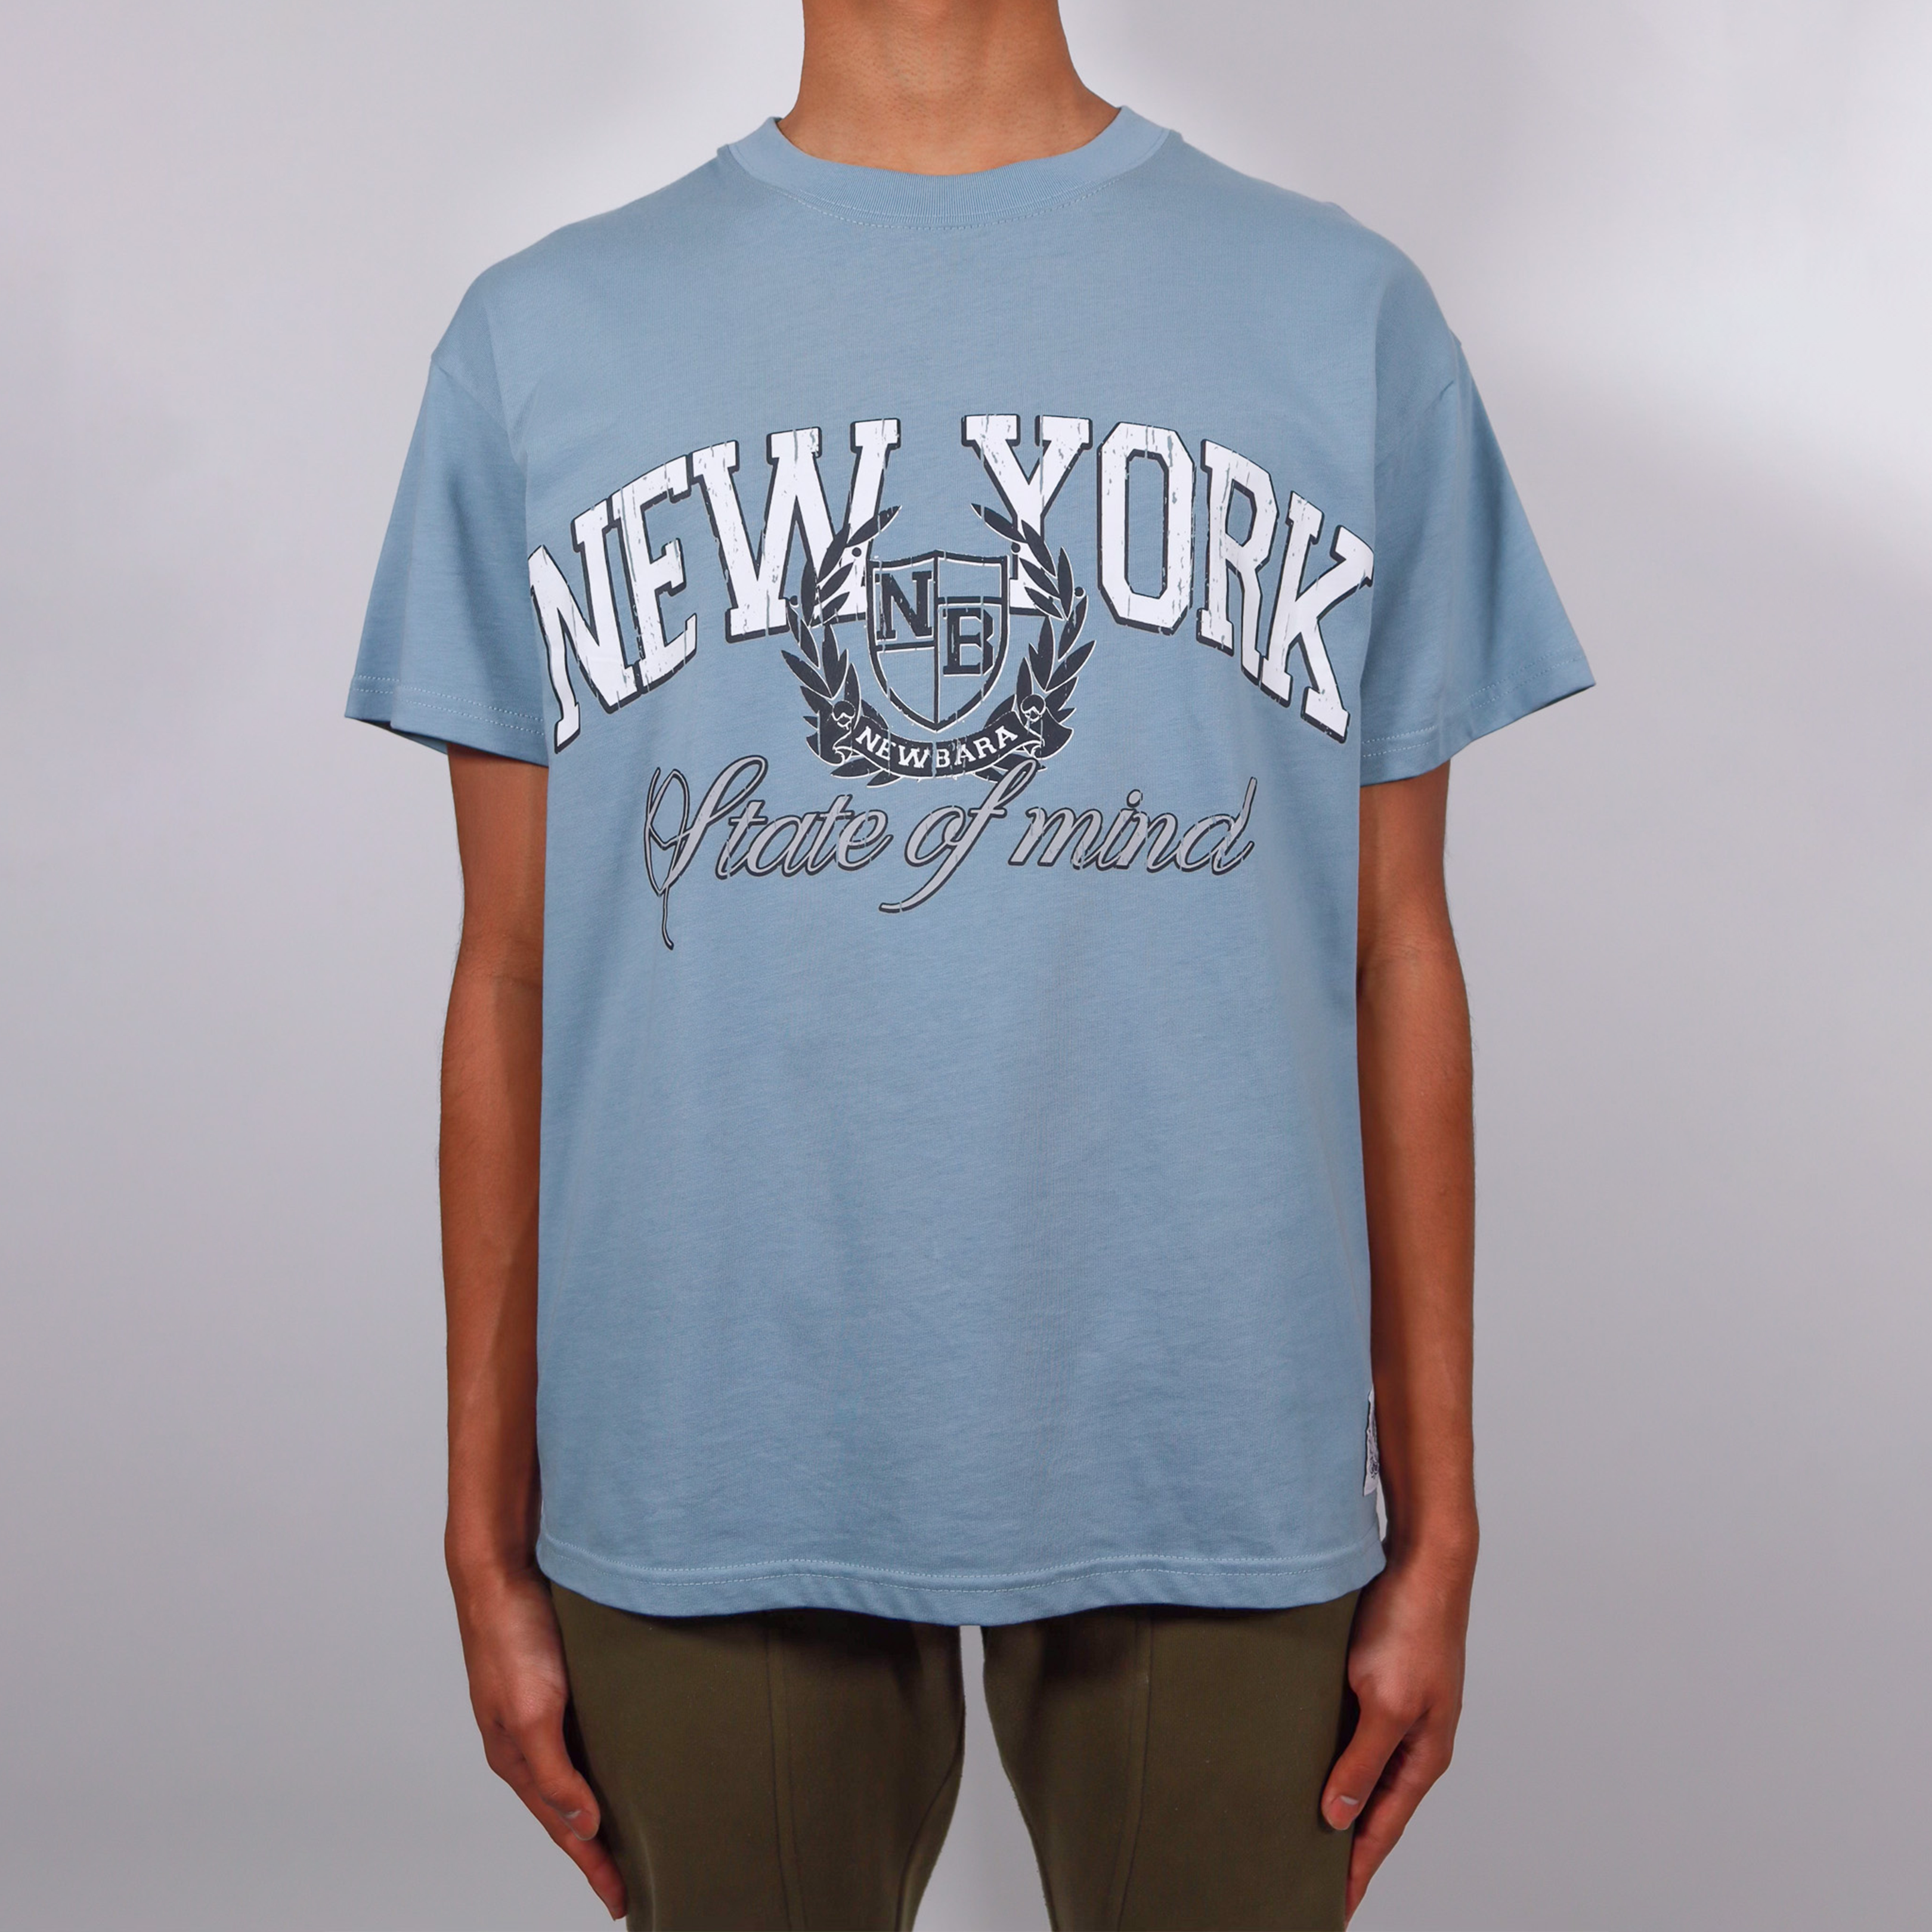 New York State Of Mind T-Shirt